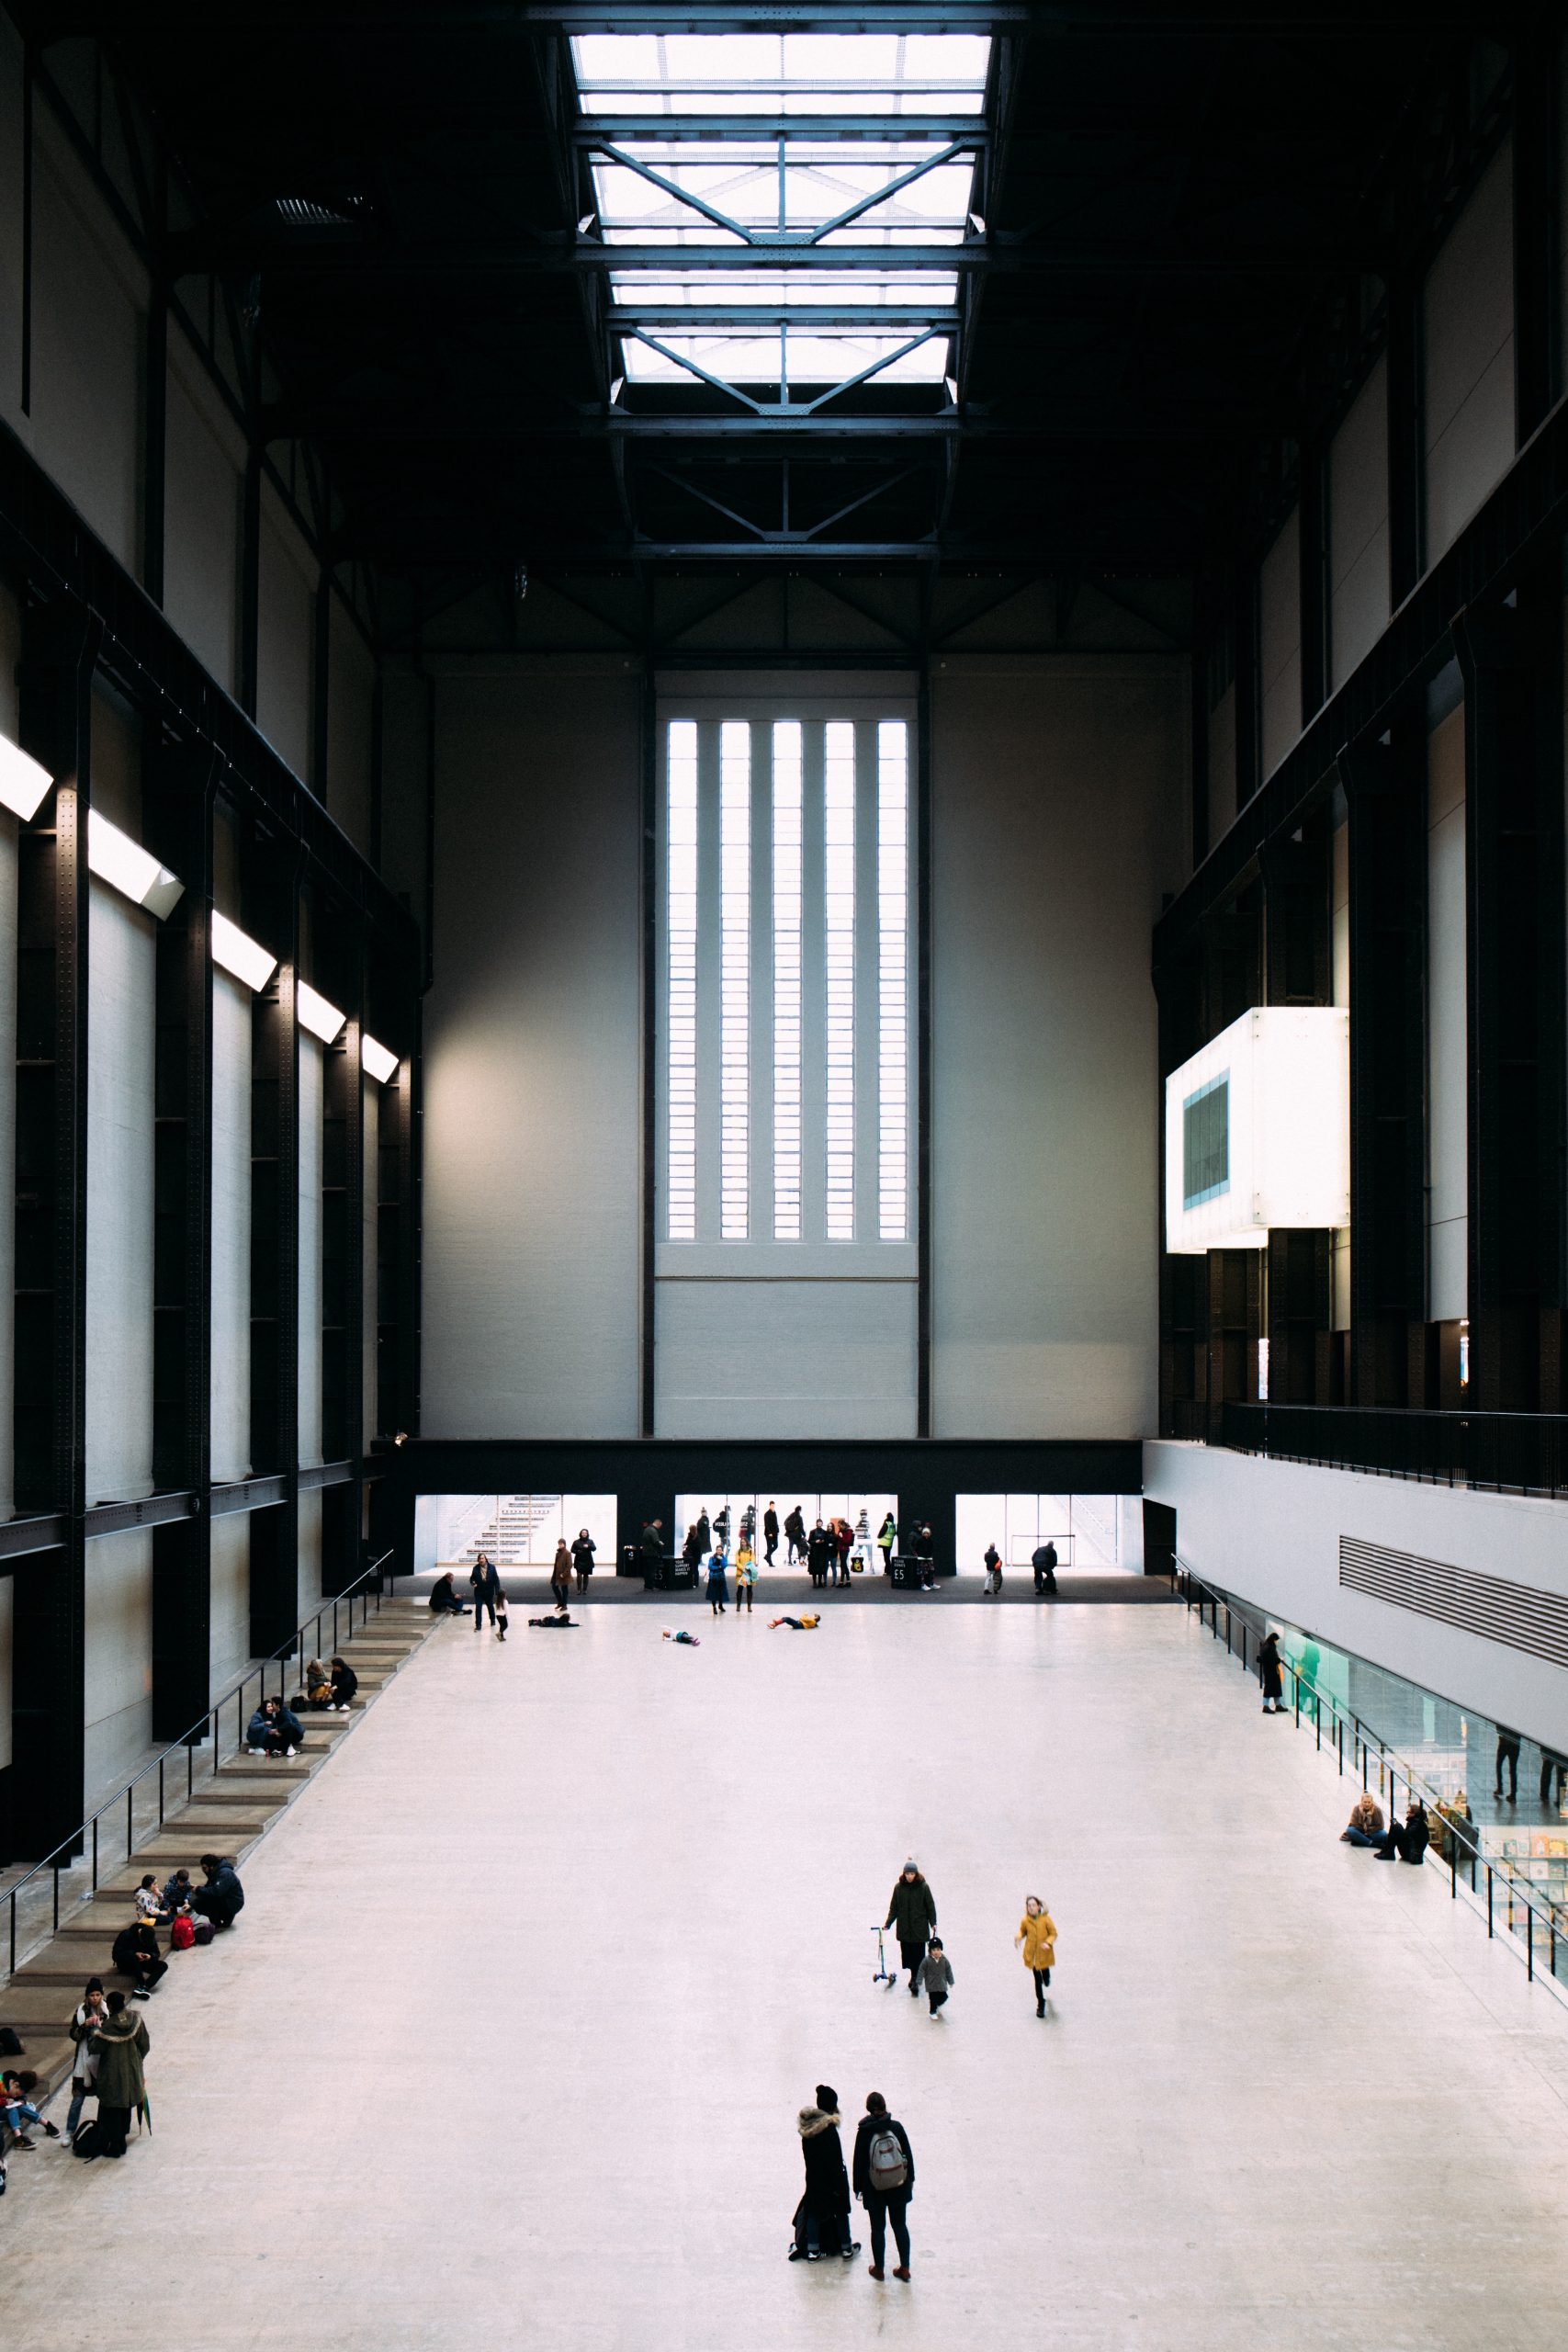 Inside Tate Modern, London, the windows and skylights in the high ceilings fill the hall with light.